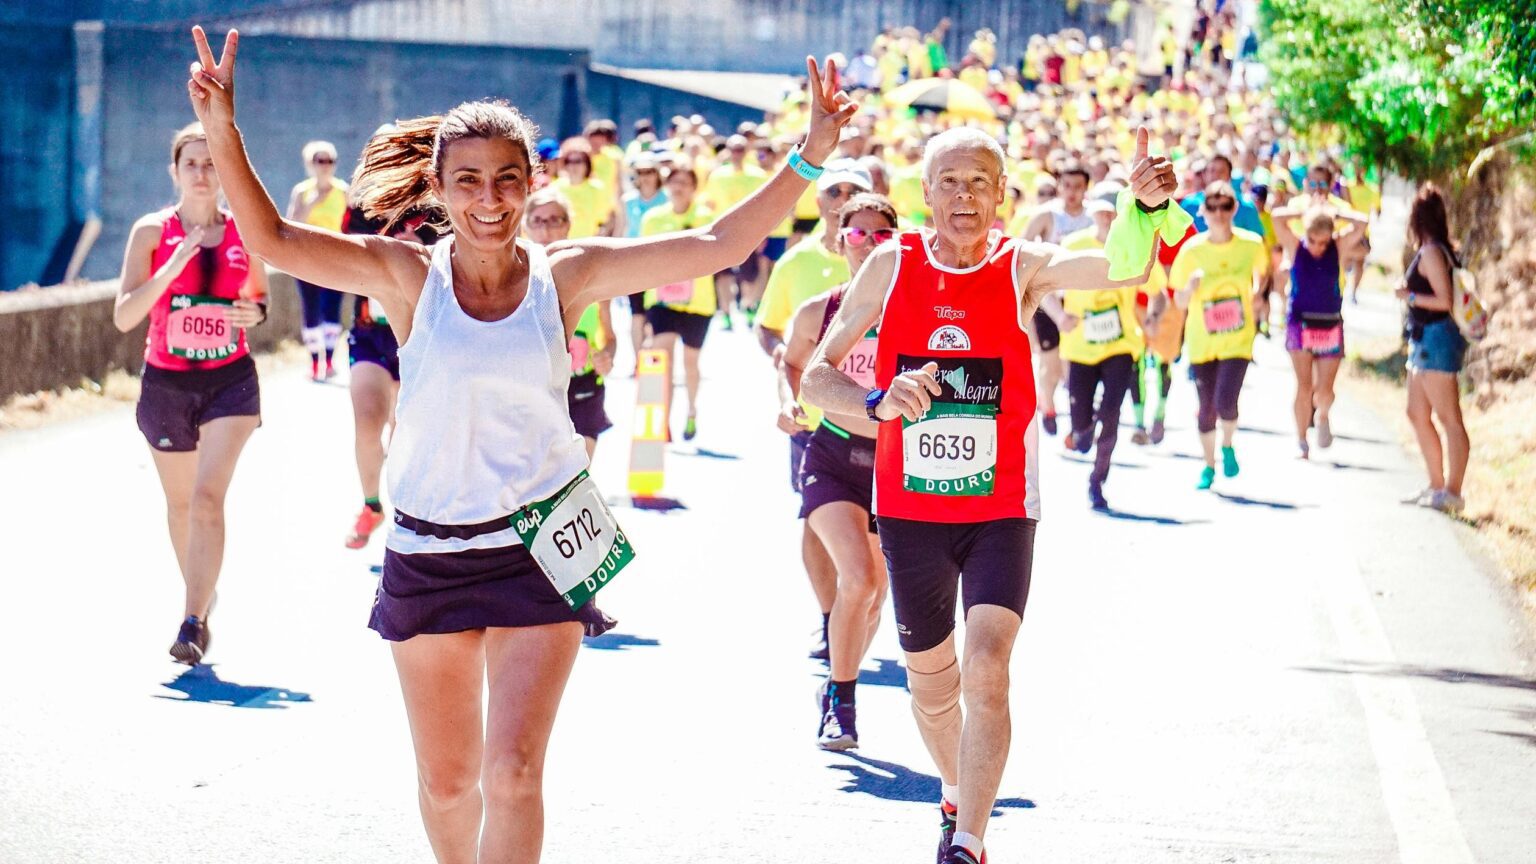 5 Reasons to Run a Women’s-Only Race